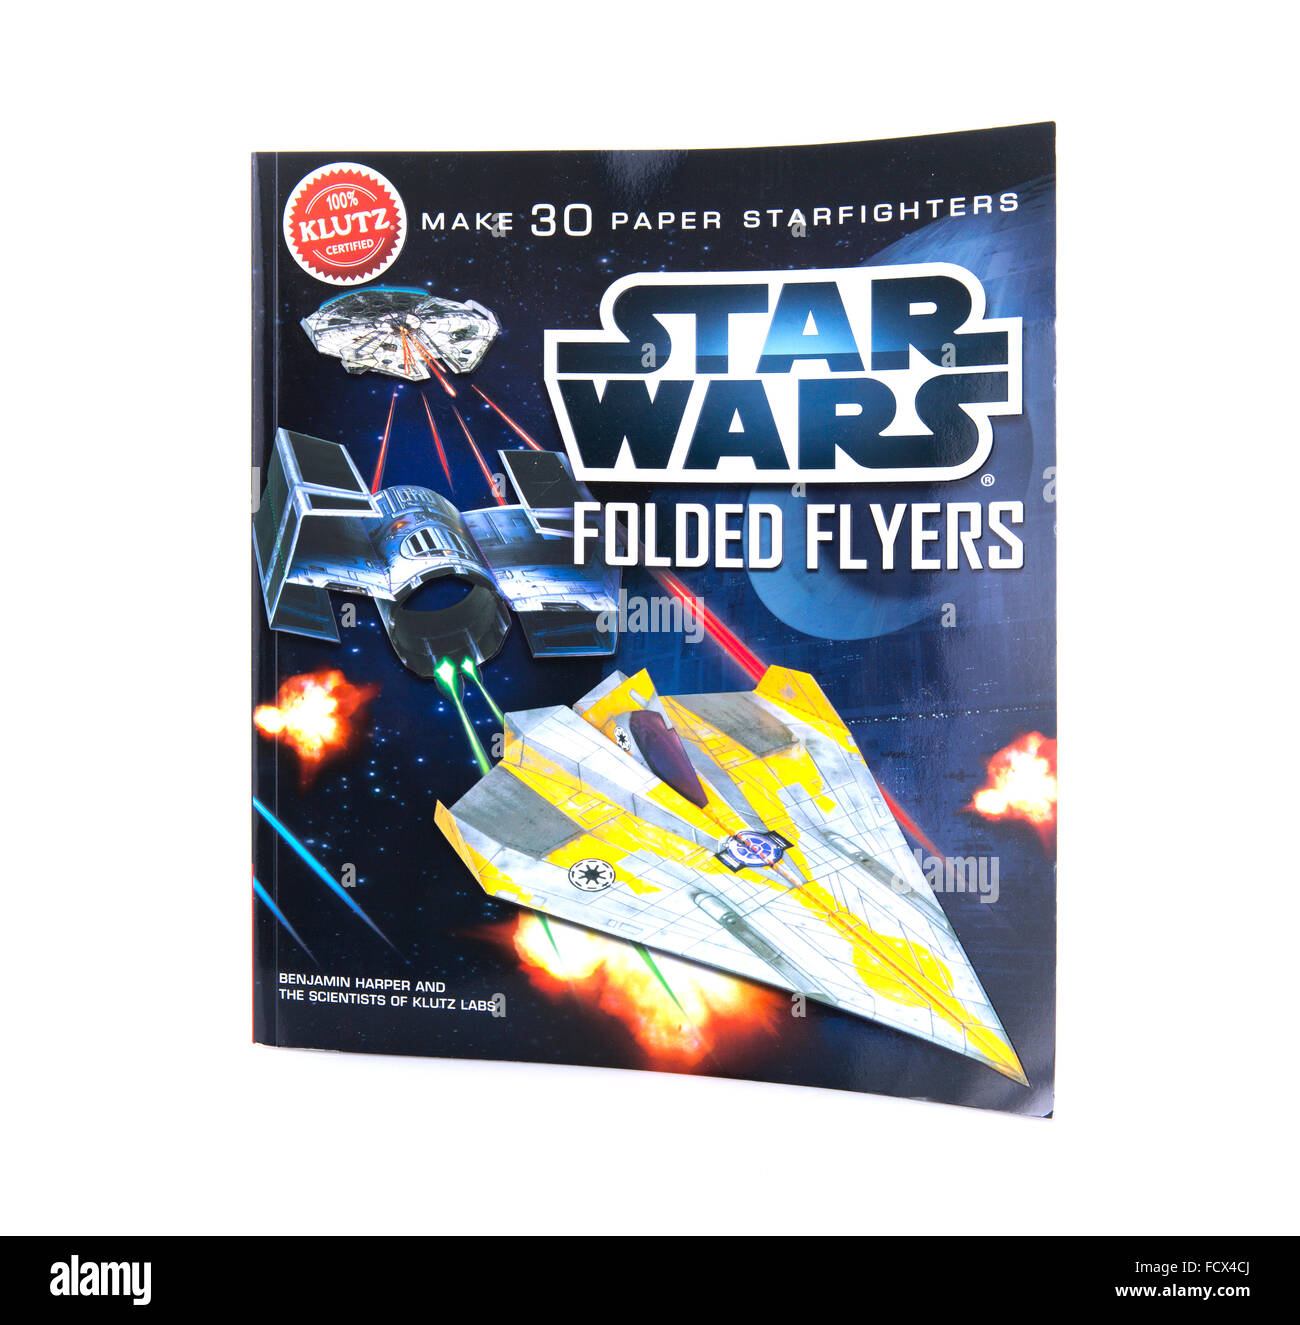 Star Wars Folded Flyer's By Klutz Labs on a white background Stock Photo